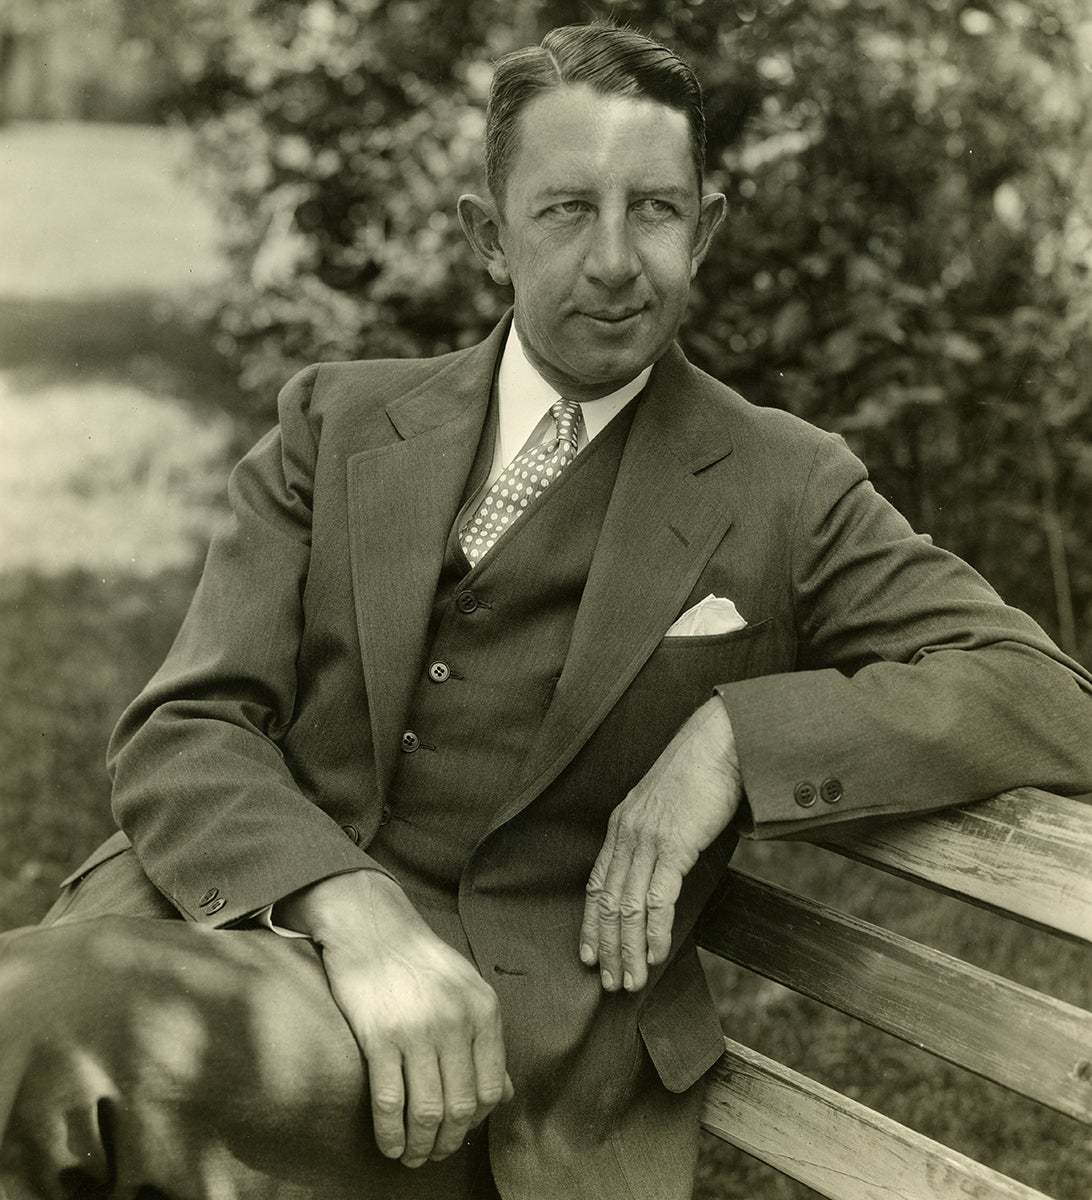 Seated portrait of Eddie Collins in a suit